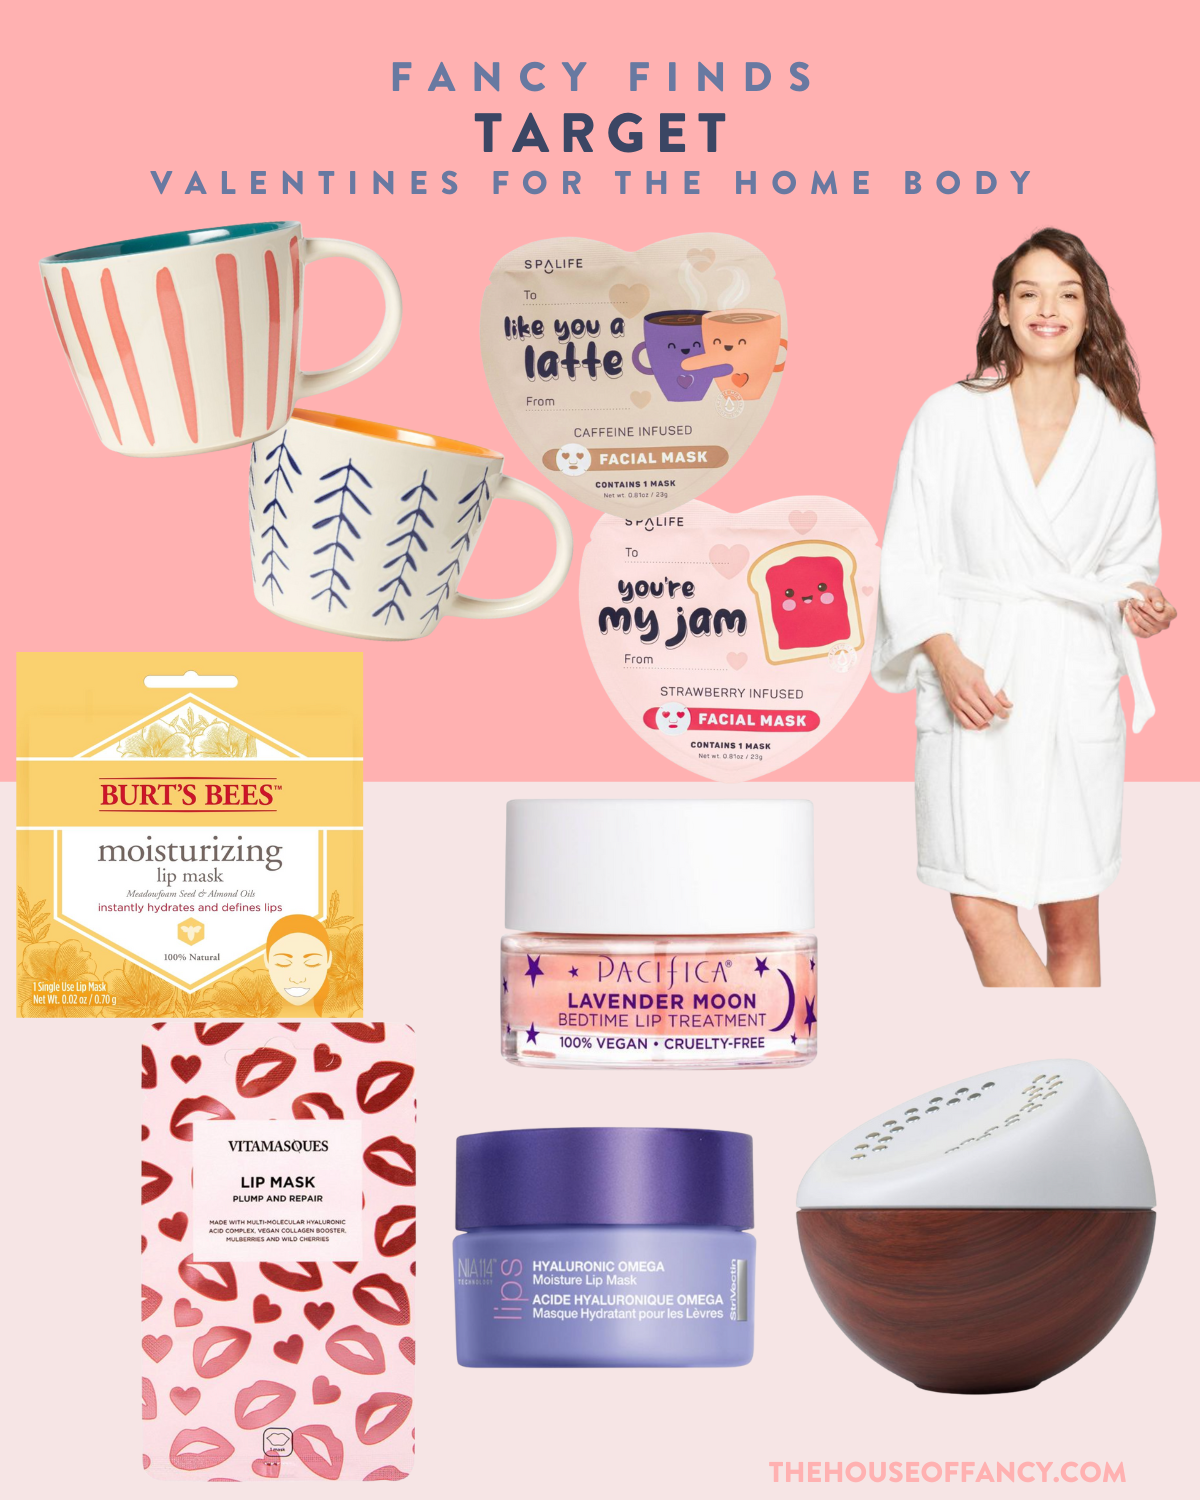 Valentine's Day Gift Guide 2023: The Best Last Minute Valentine's